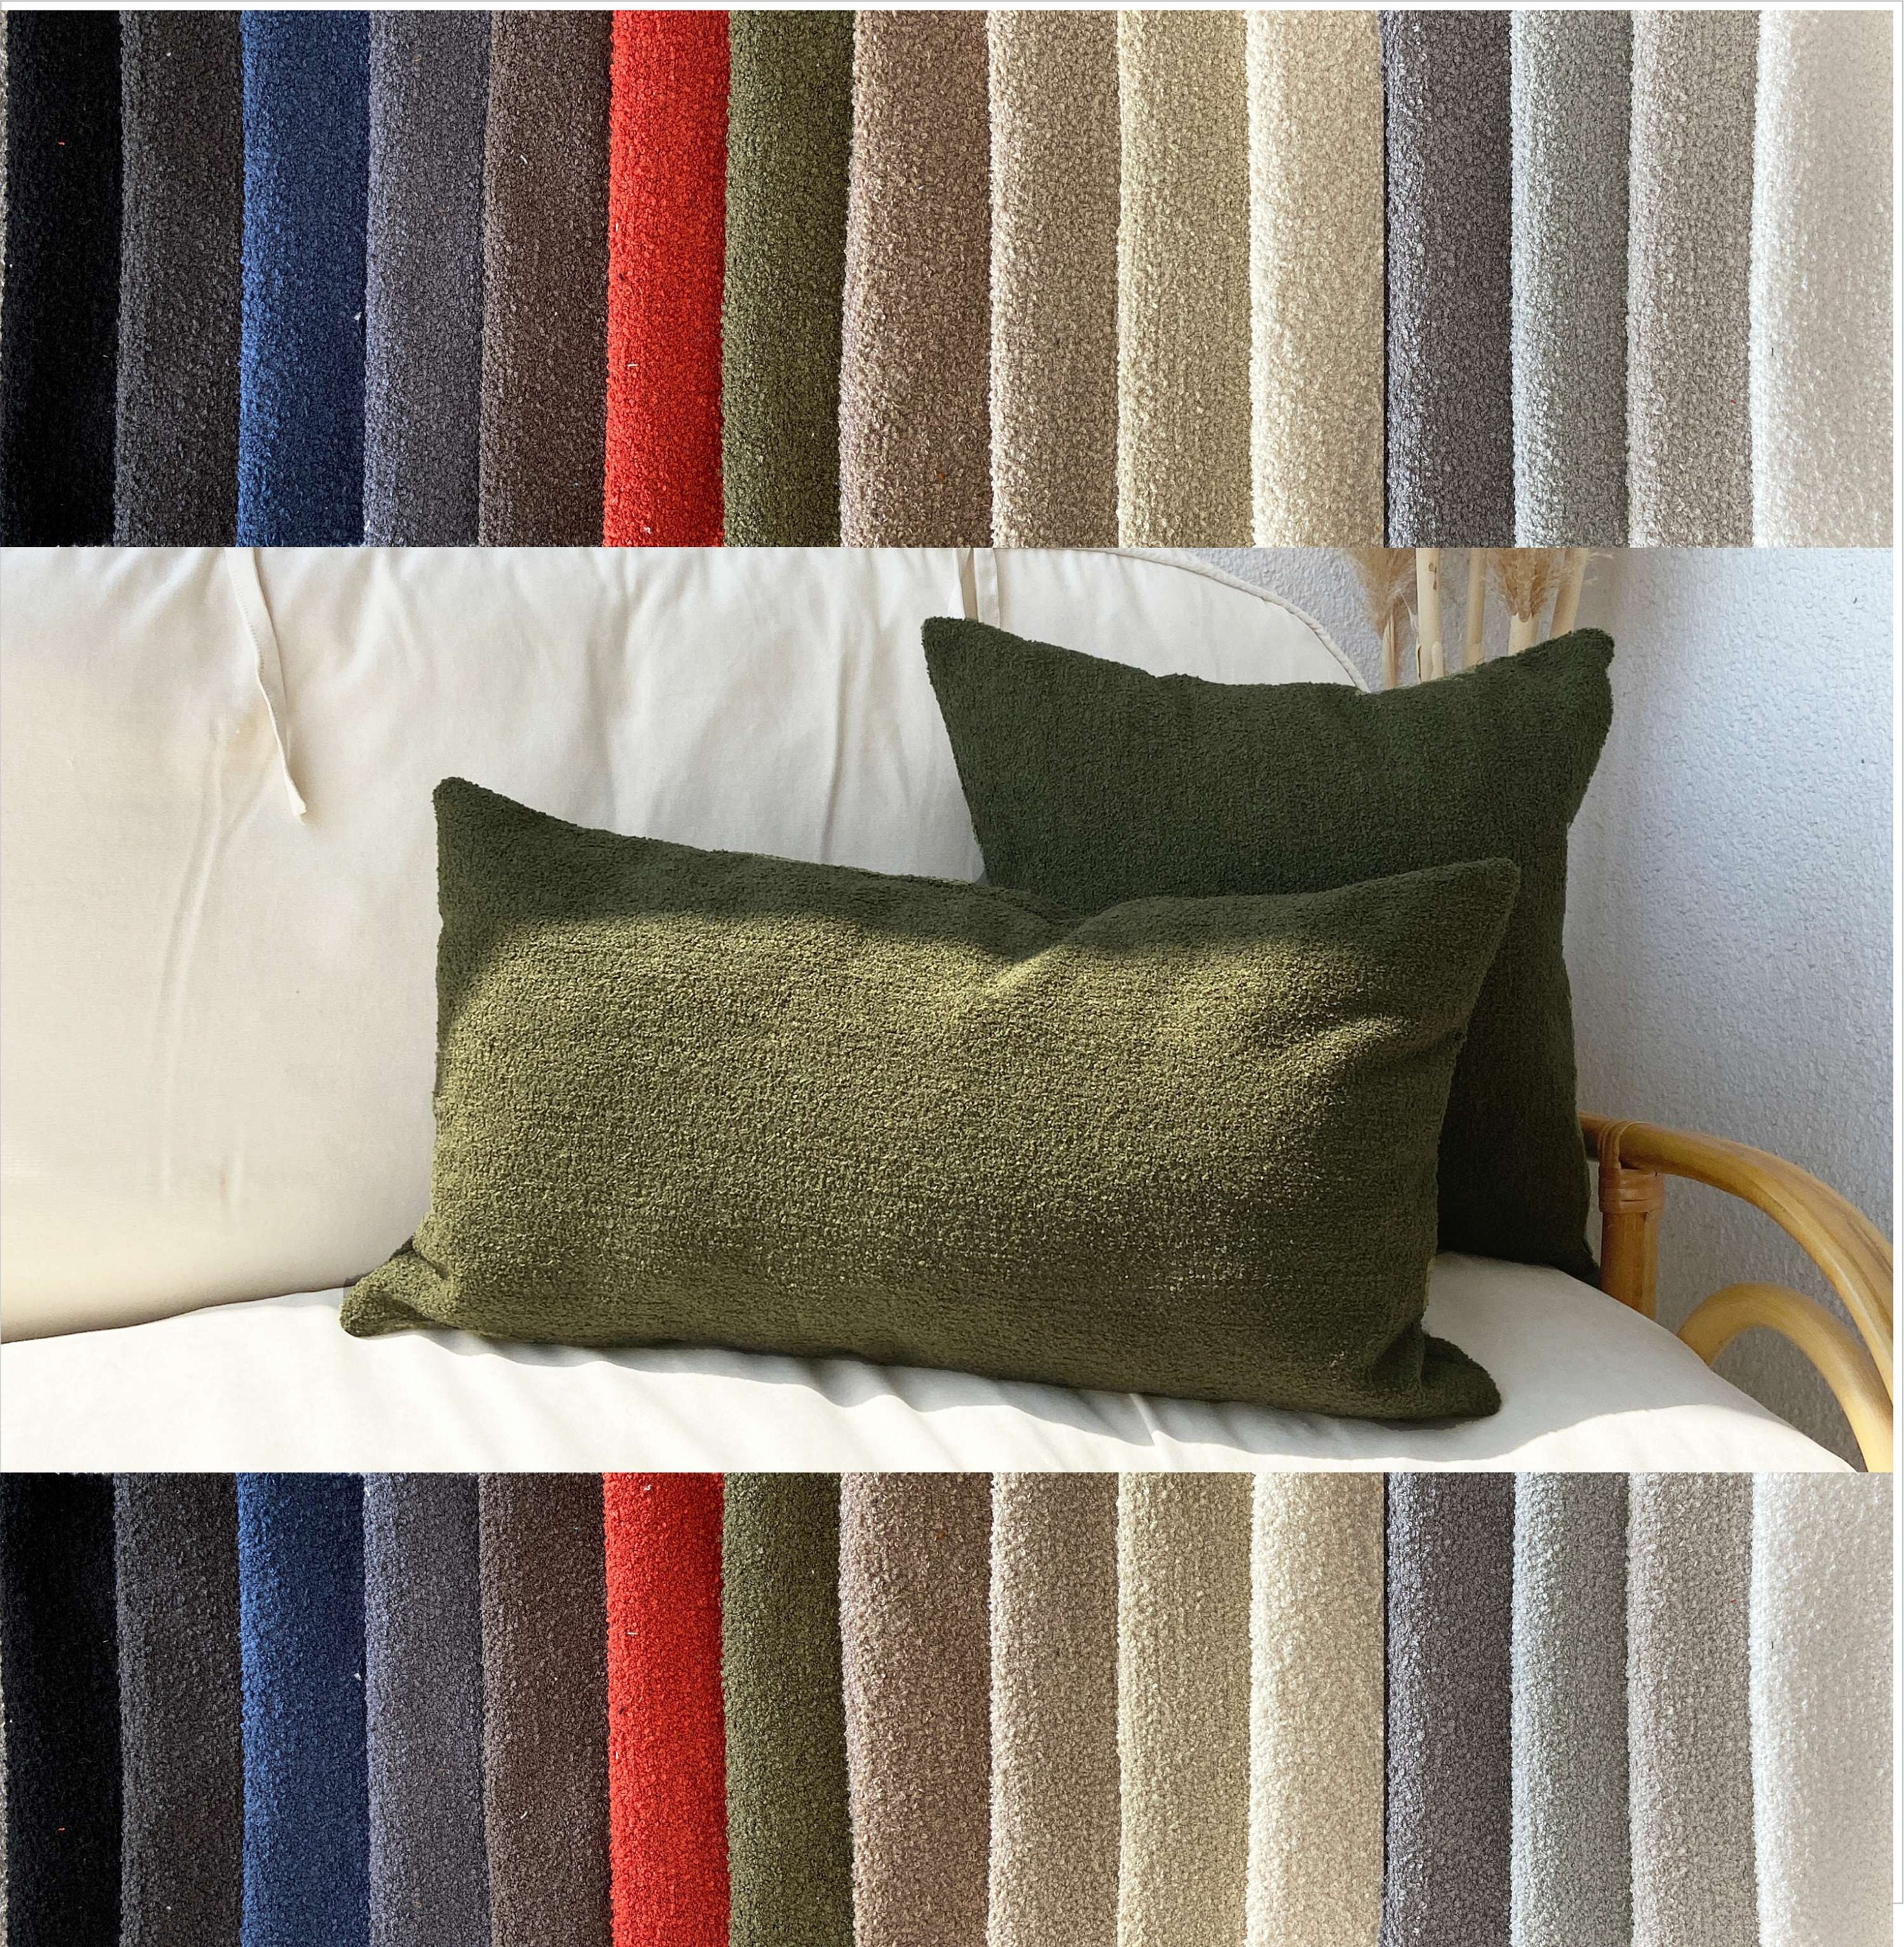 Where to Buy Cheap Accent Pillows: H&M Pillow Cover Review - C'est